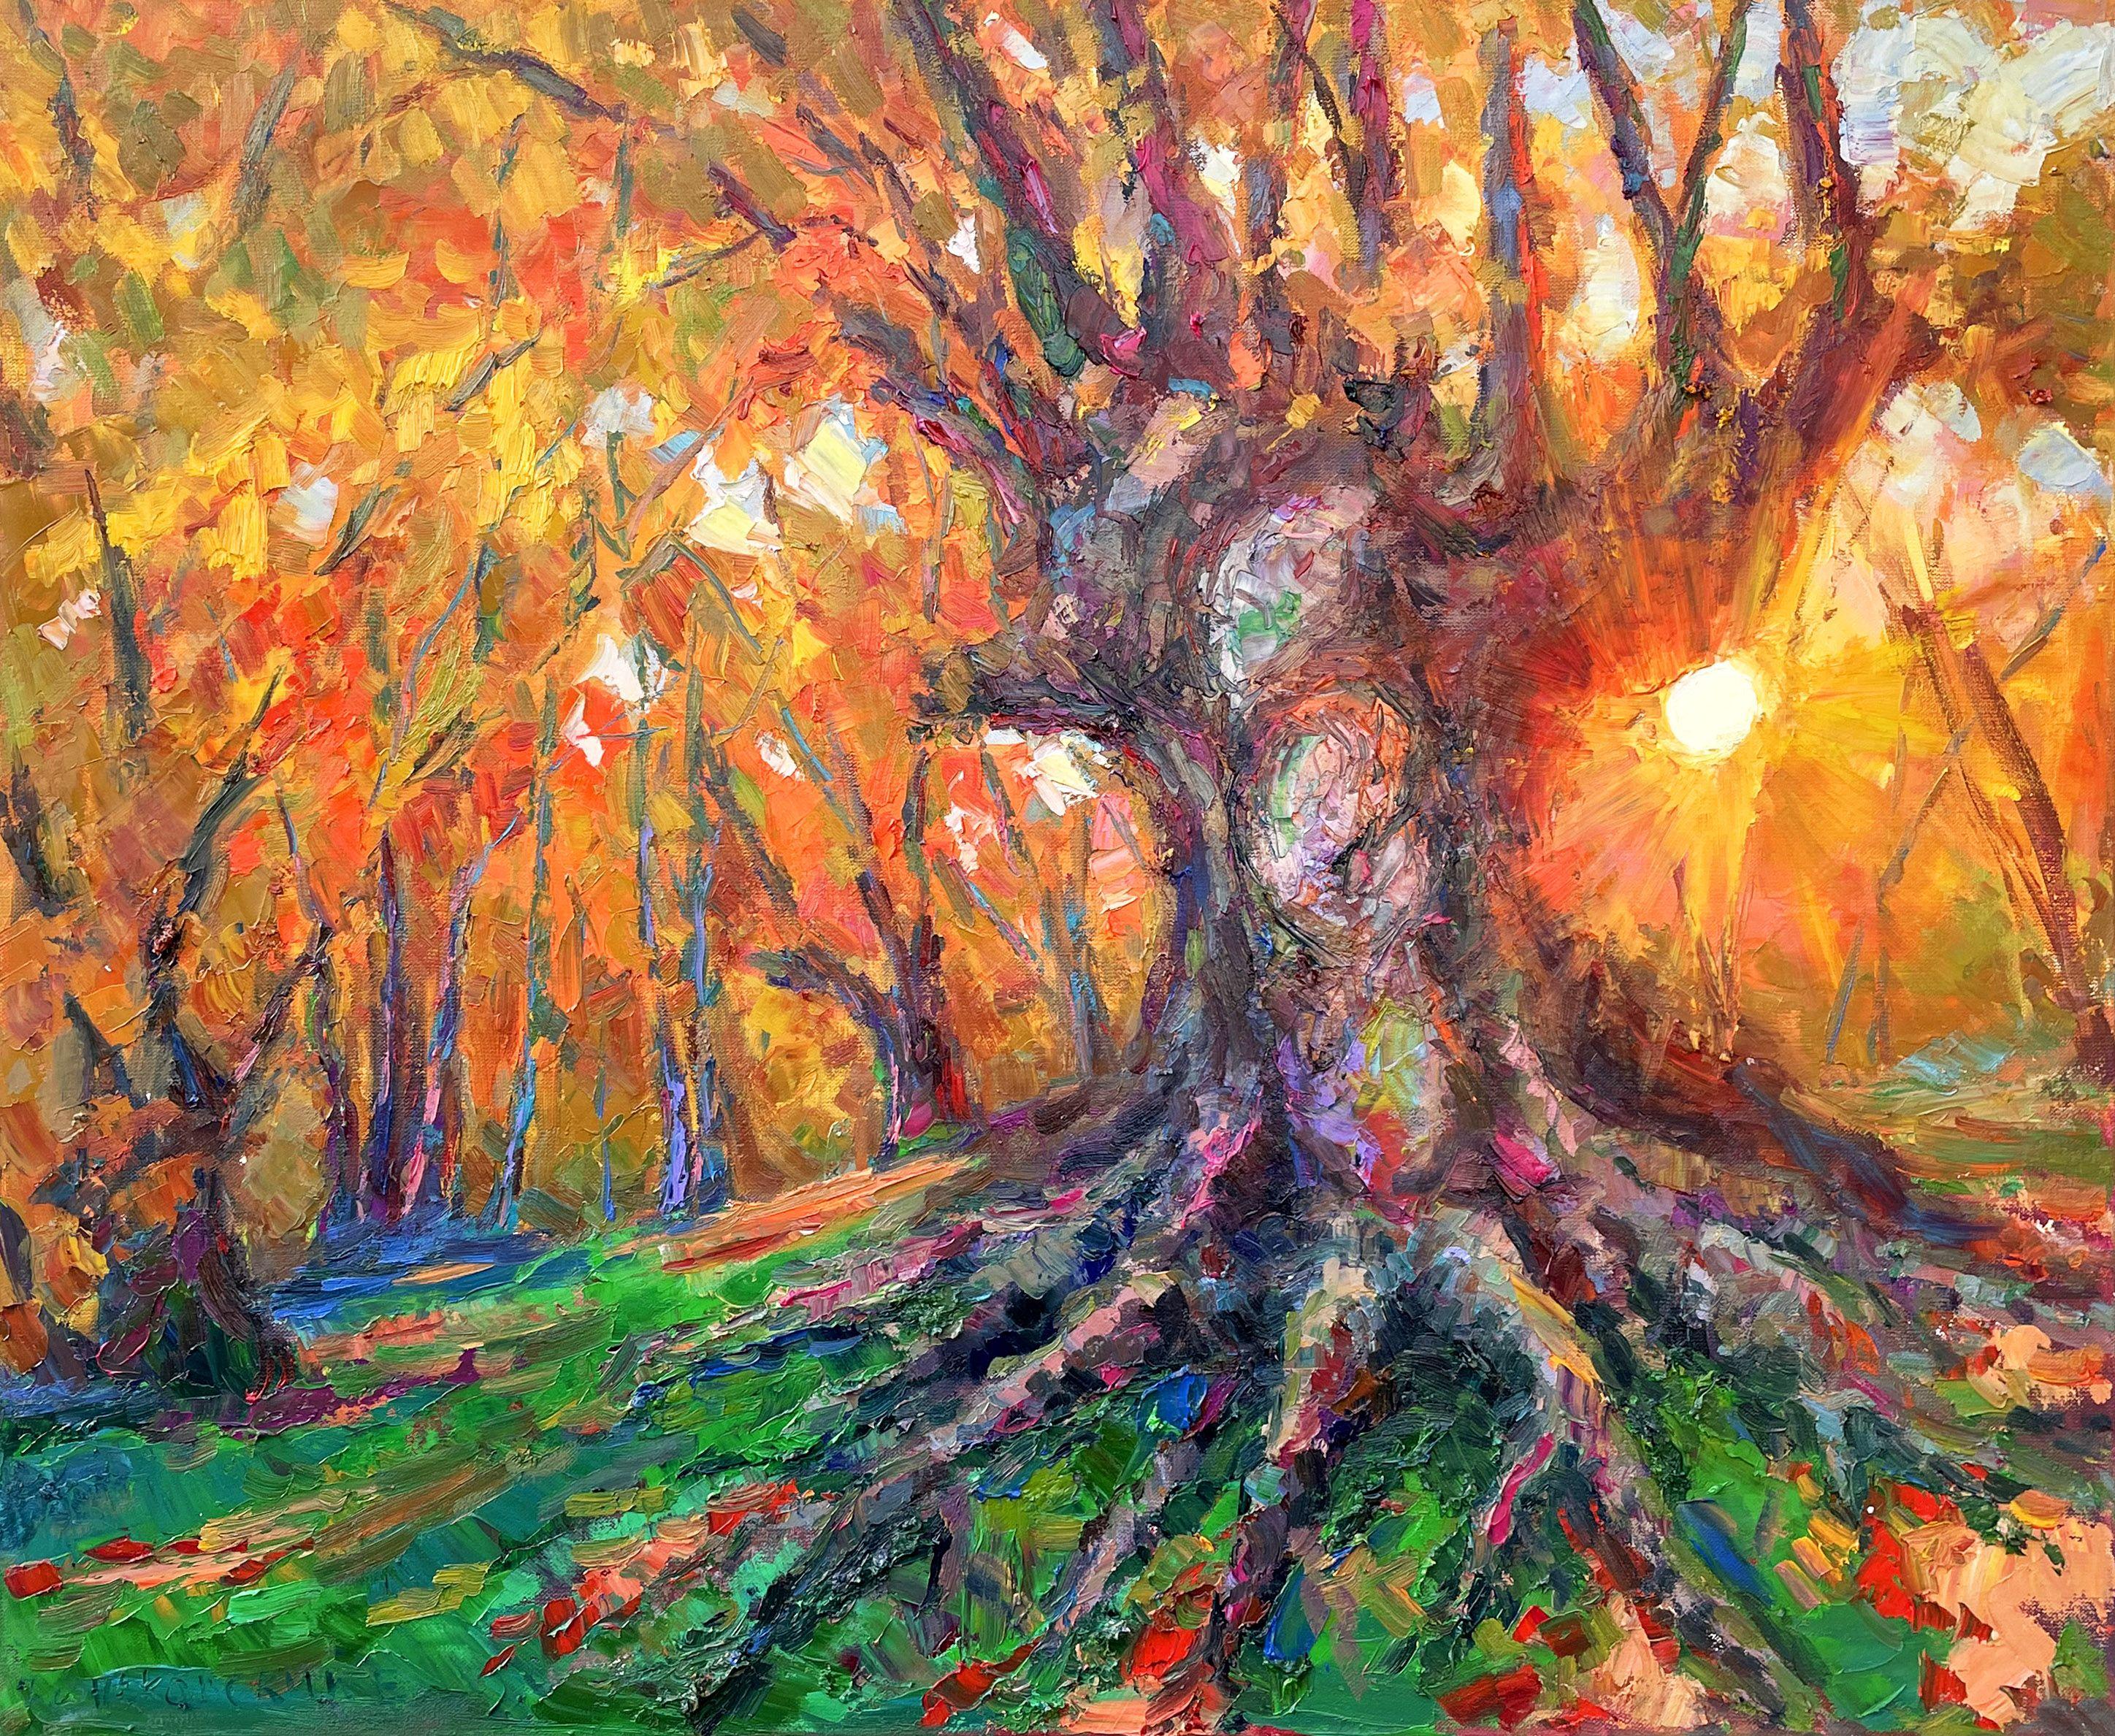 Original Oil painting by Ukrainian artist Evgeny Chernyakovsky "Autumn forest" 75.0 X 90.0 CM / 29.5 X 35.4 IN HIGH QUALITY oil on canvas Signed on the front and back Dated 2022 Good condition GUARANTEE OF AUTHENTICITY :: Painting :: Impressionist